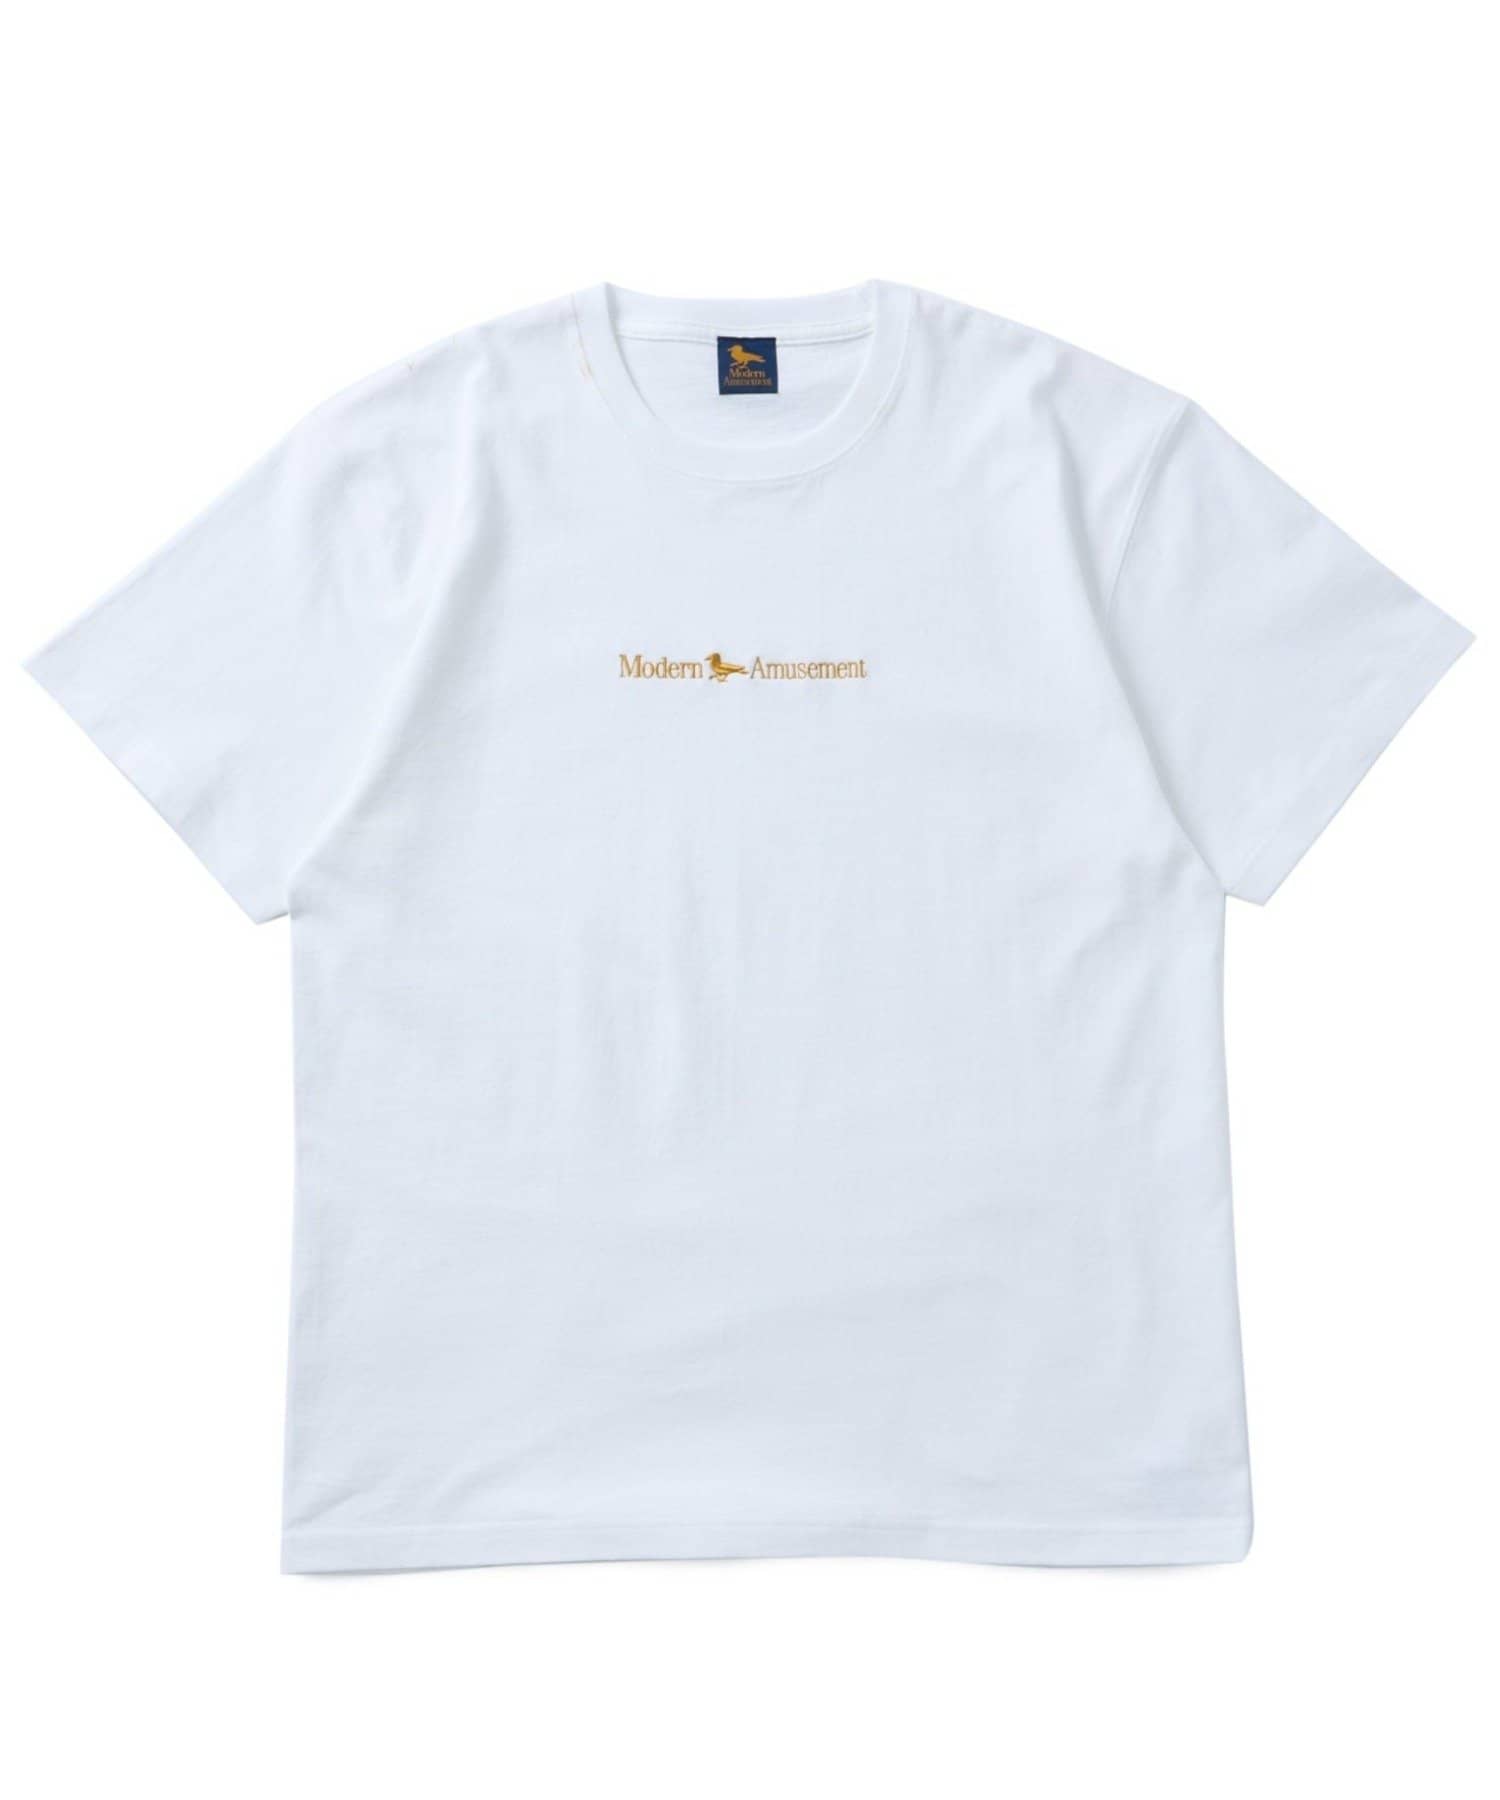 WHO’S WHO gallery(フーズフーギャラリー) モダンアミューズメント TEE